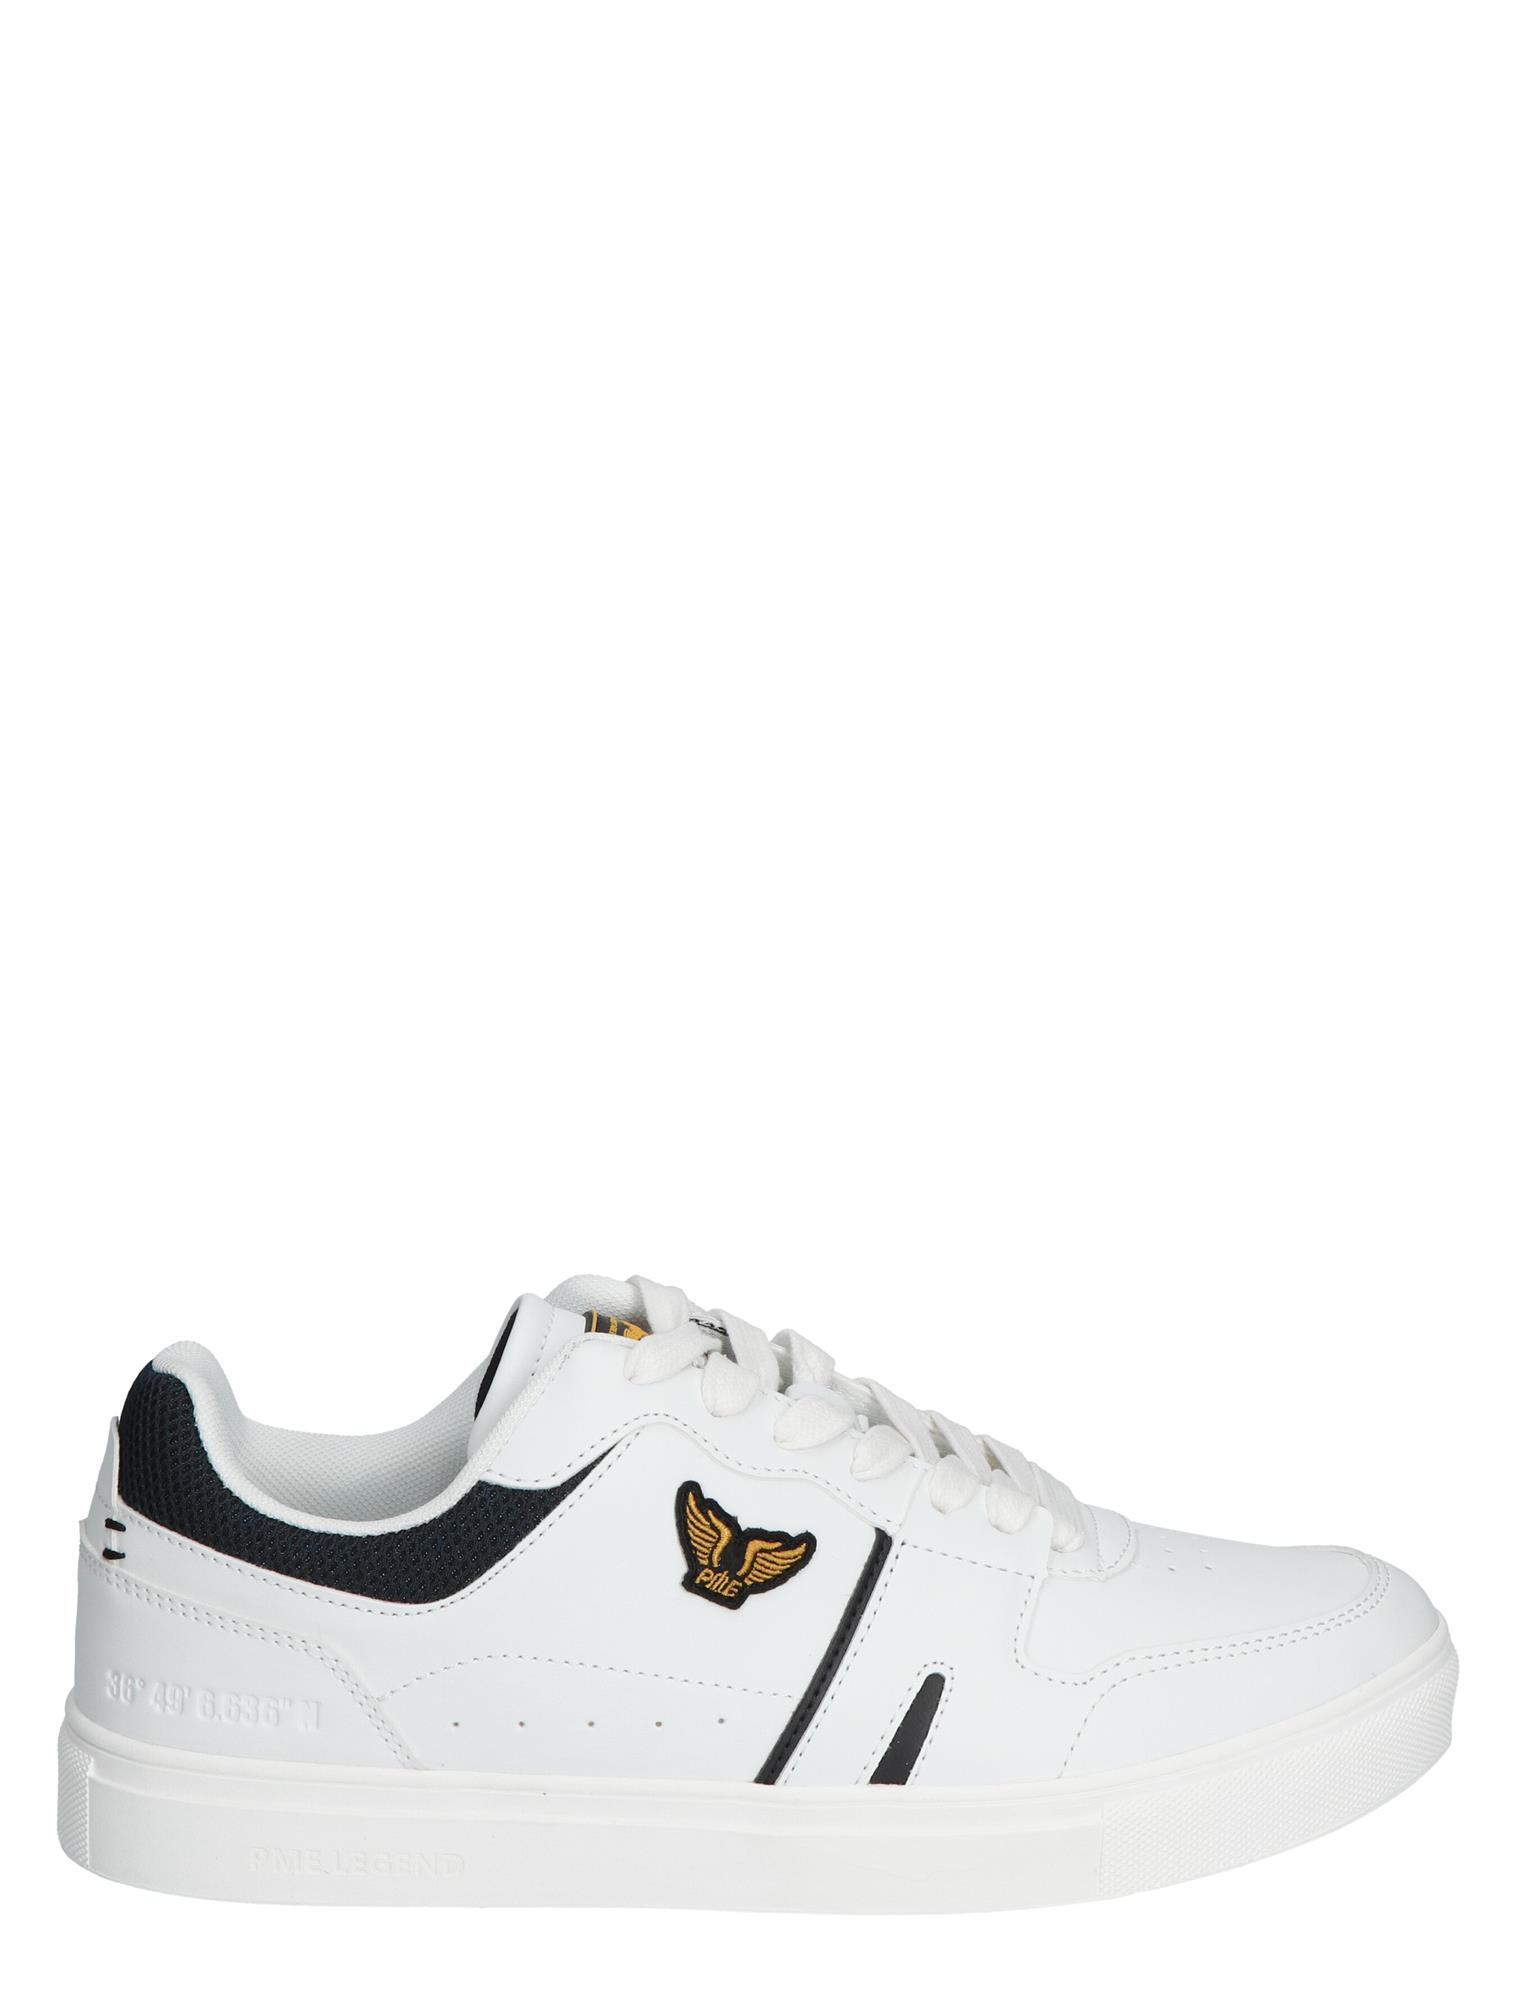 Pme 906 White of Low Sneakers